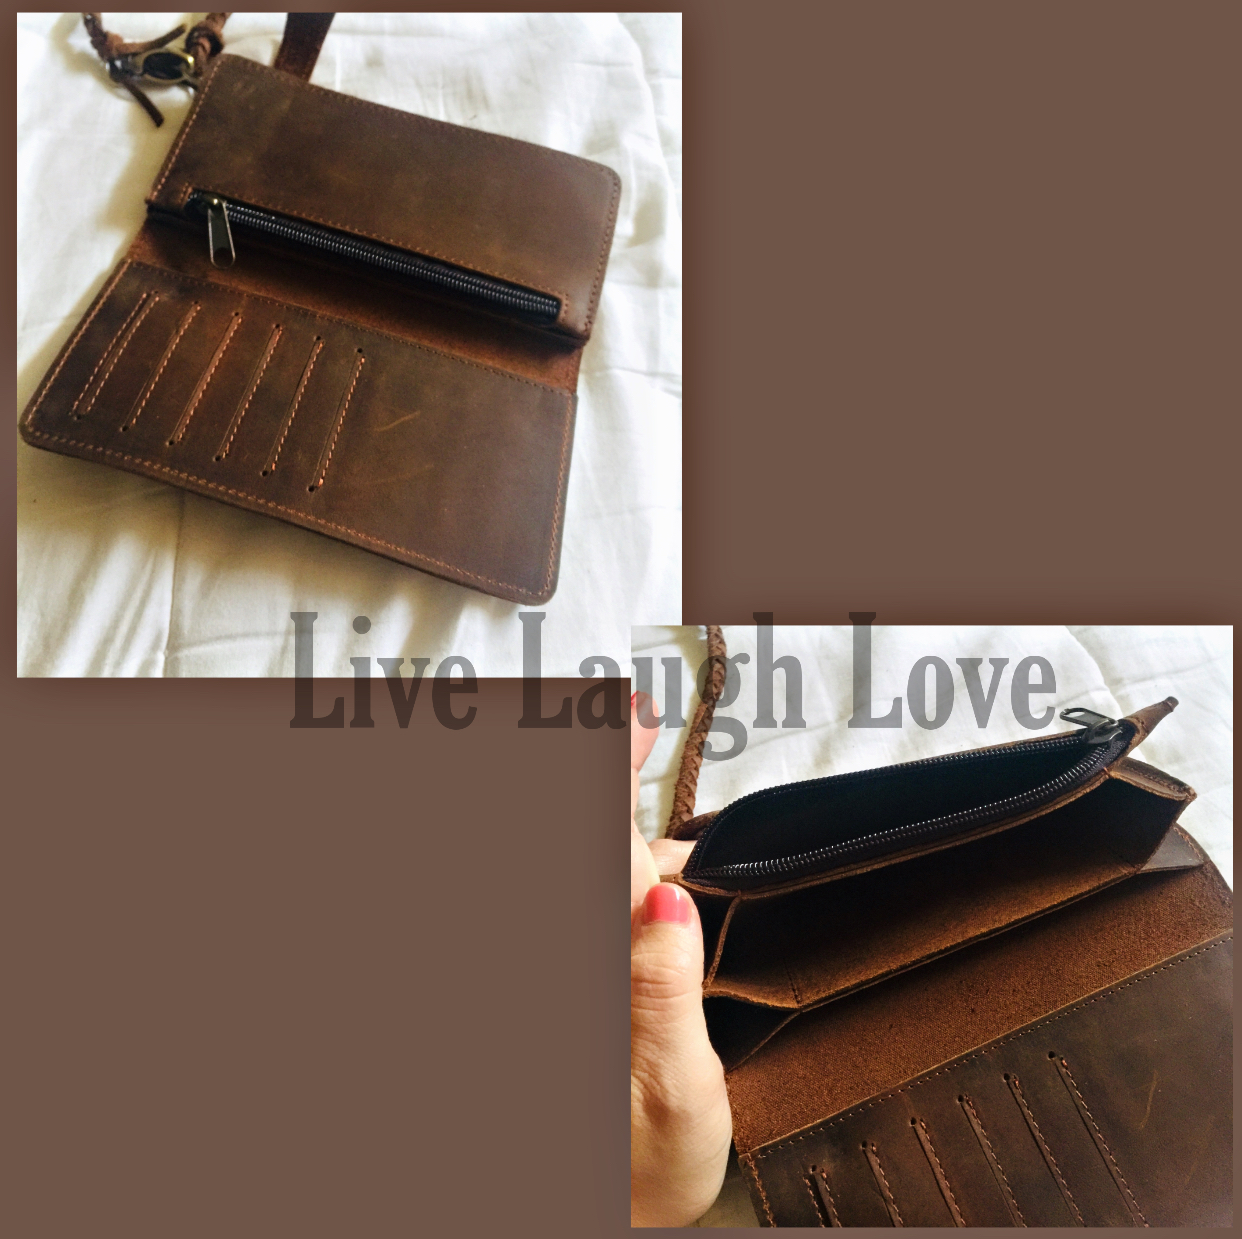 Live Laugh Love: TRENDHIM Gift Guide Review & Giveaway!